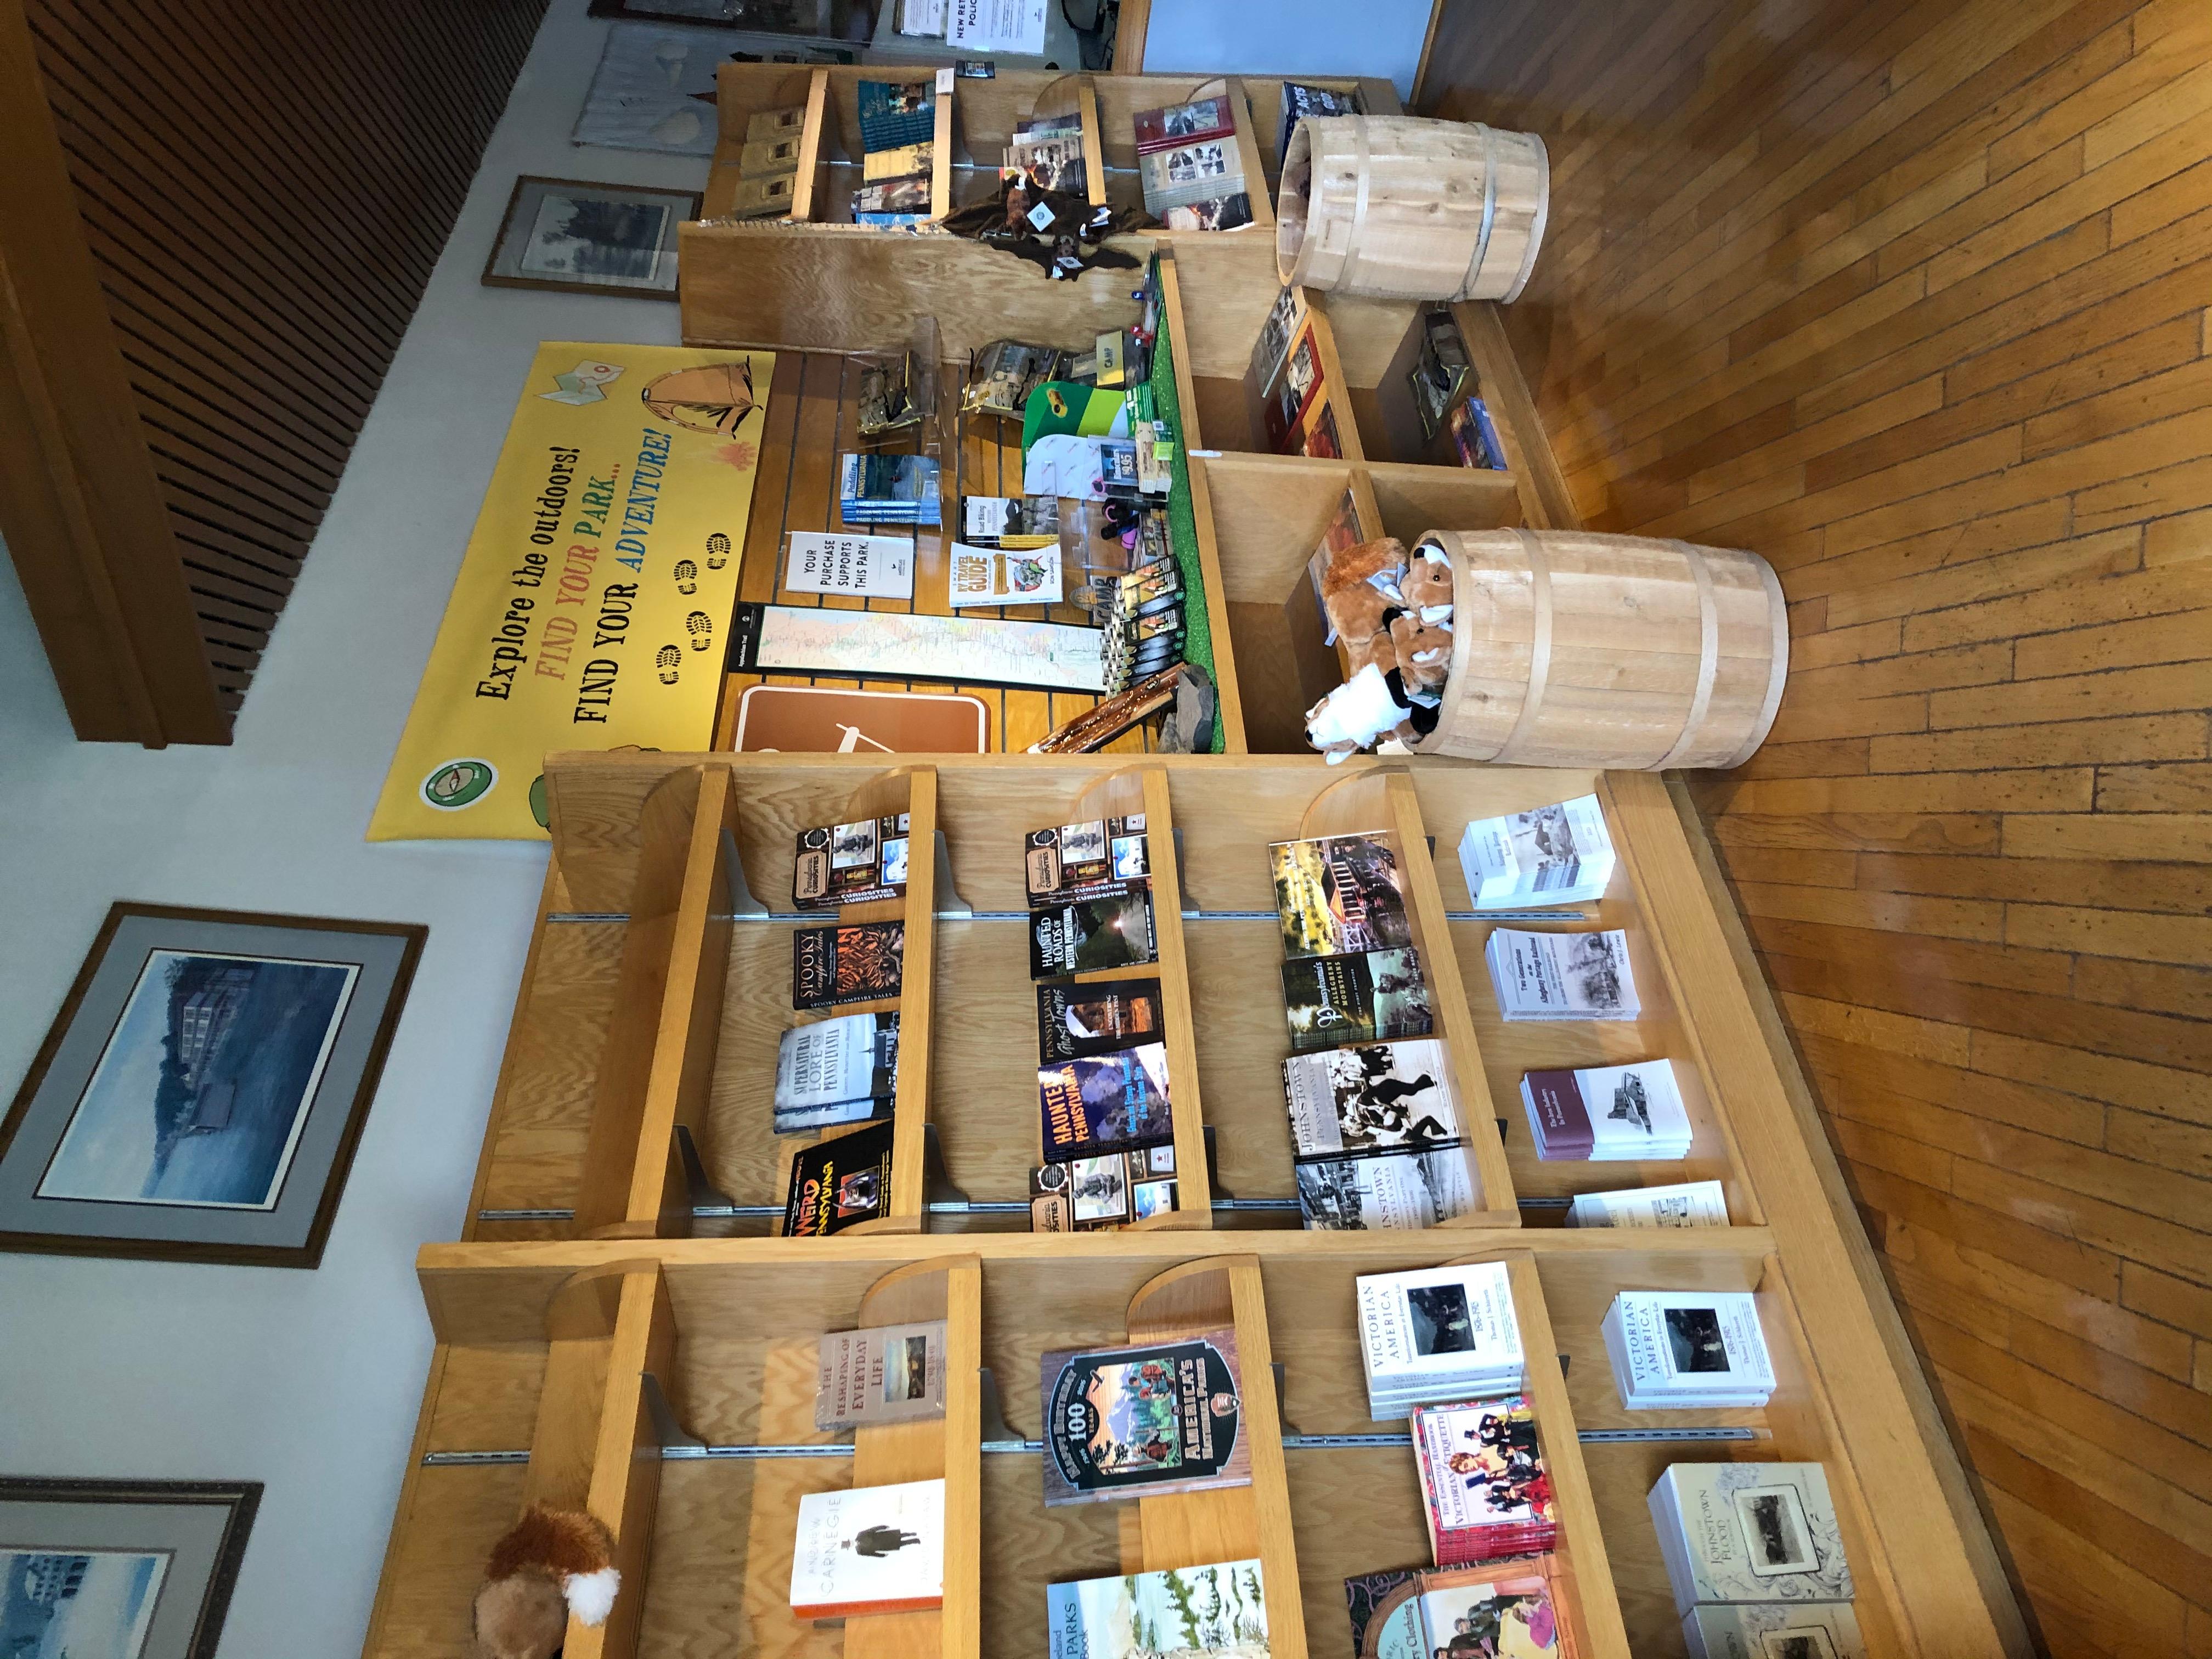 The Visitor Center bookstore has many items available for purchase.